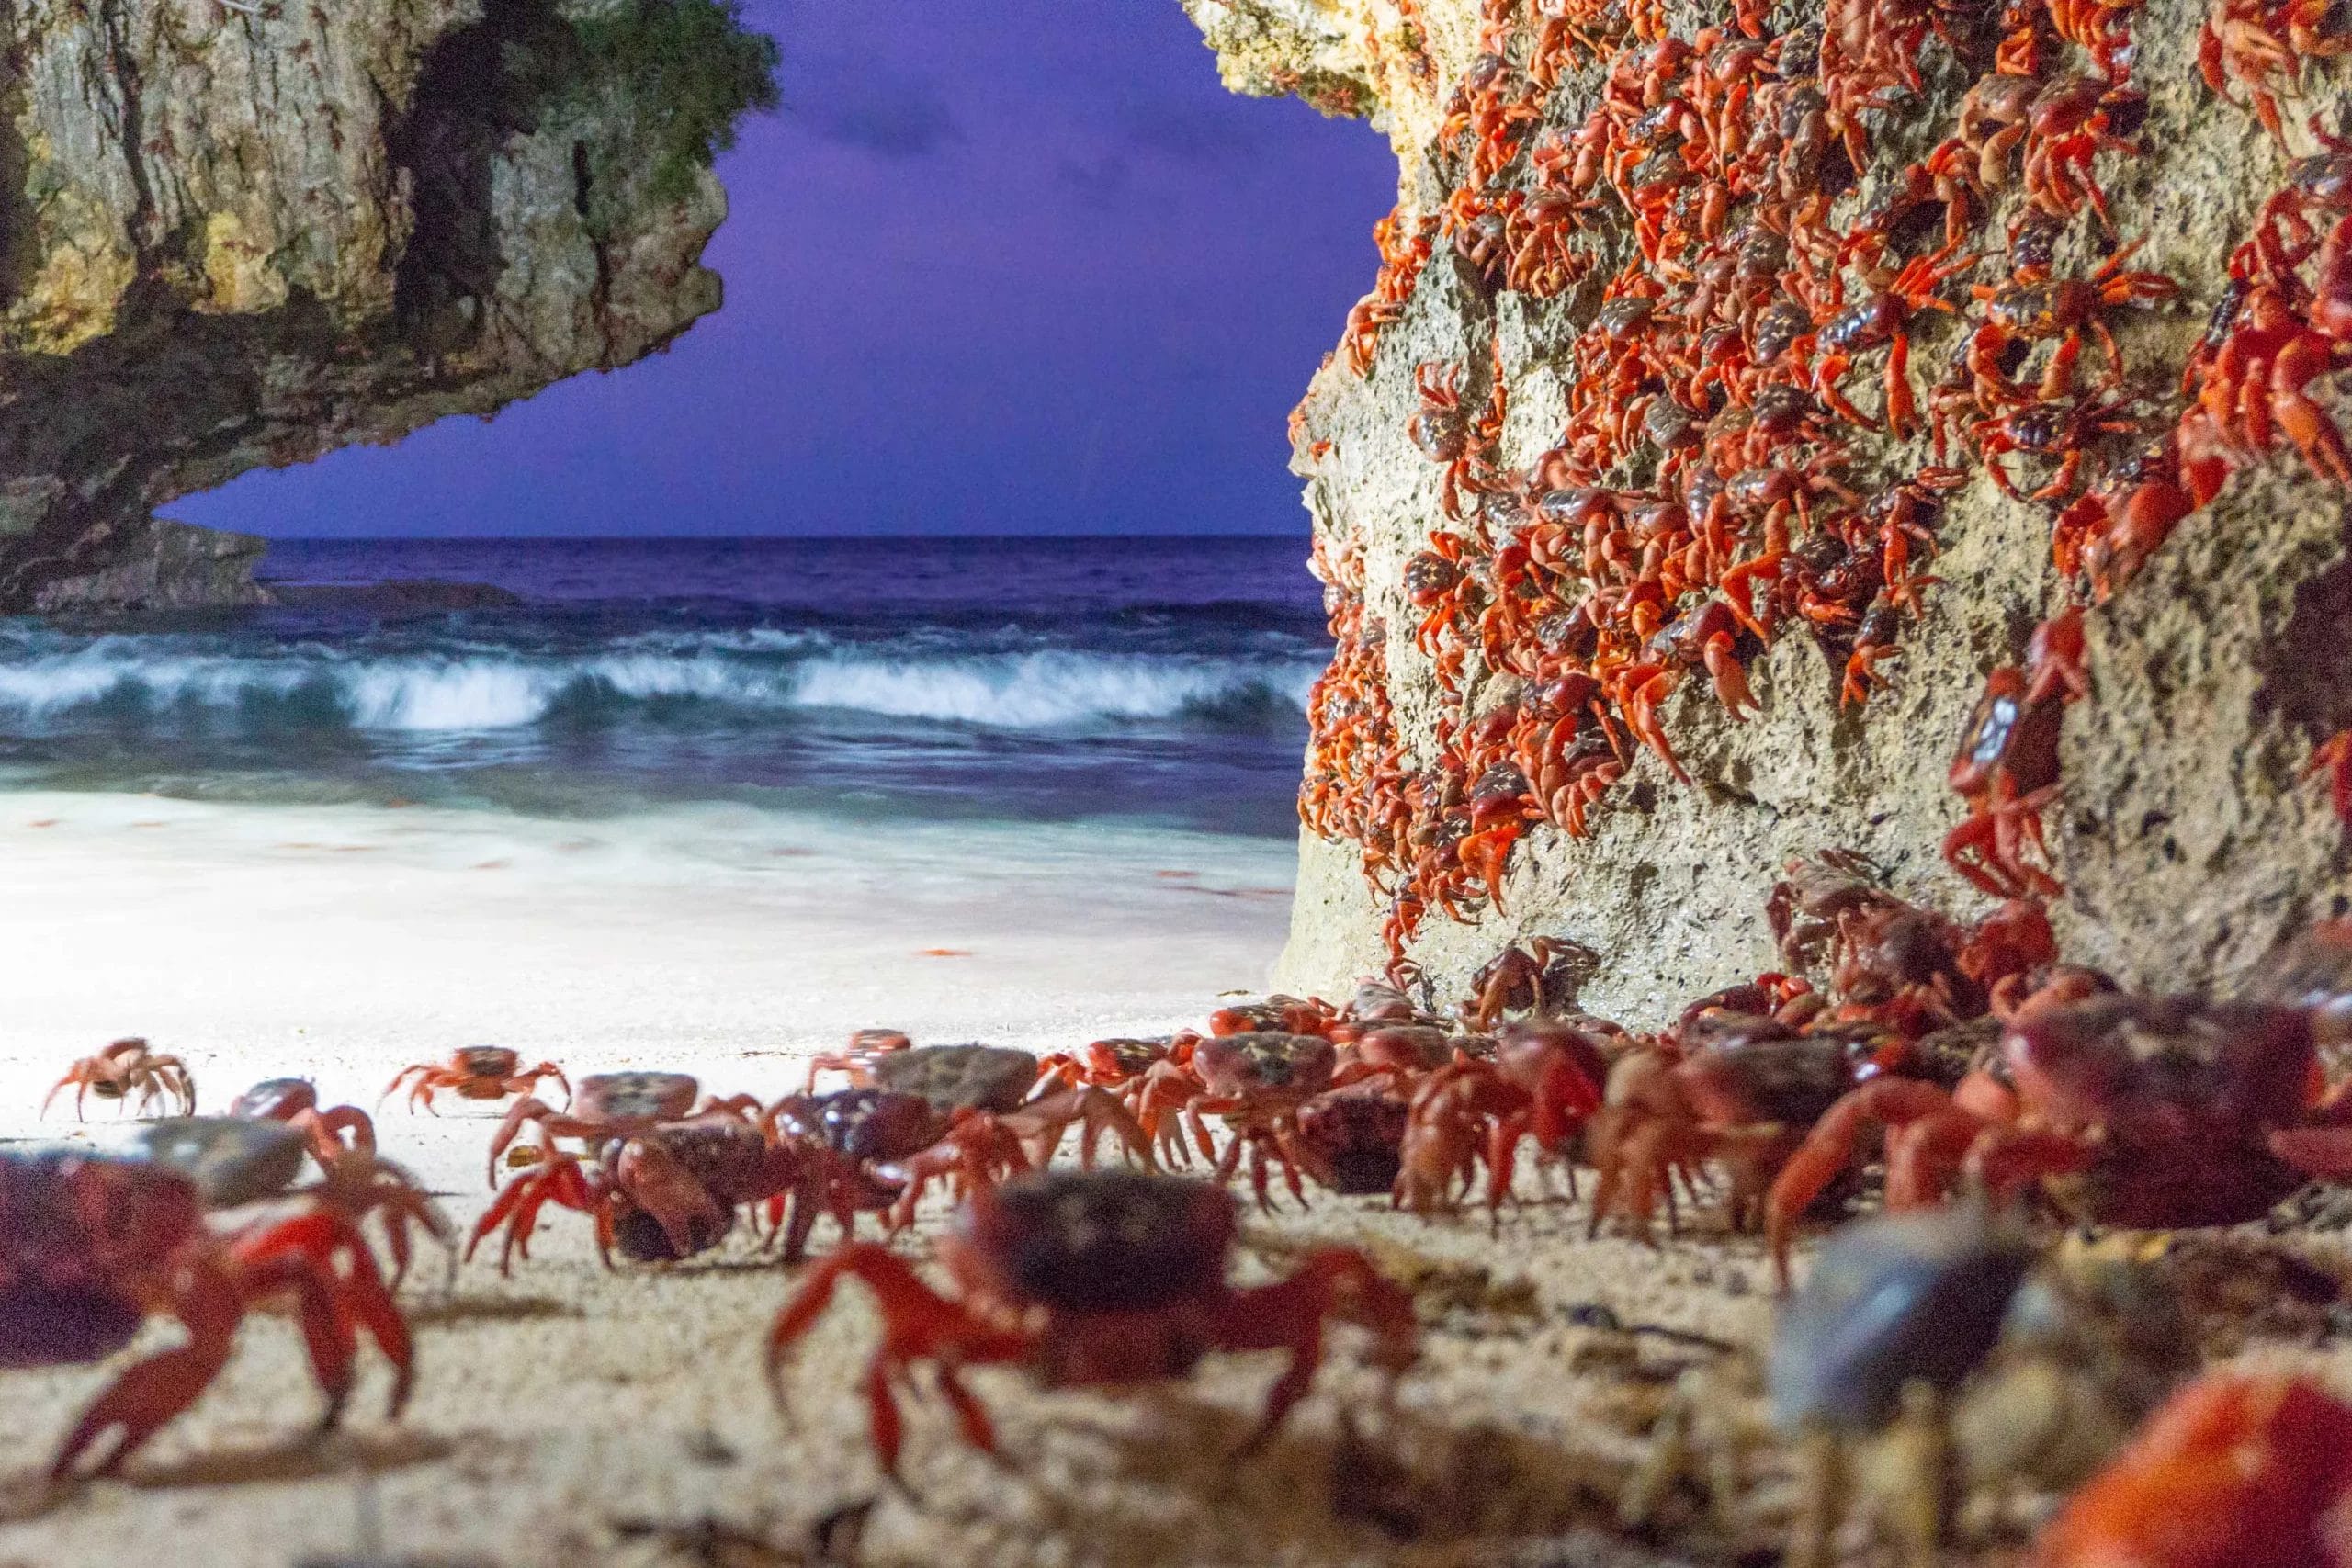 Hundreds of red crabs on the white sand shore and beach cliffs of Christmas Island